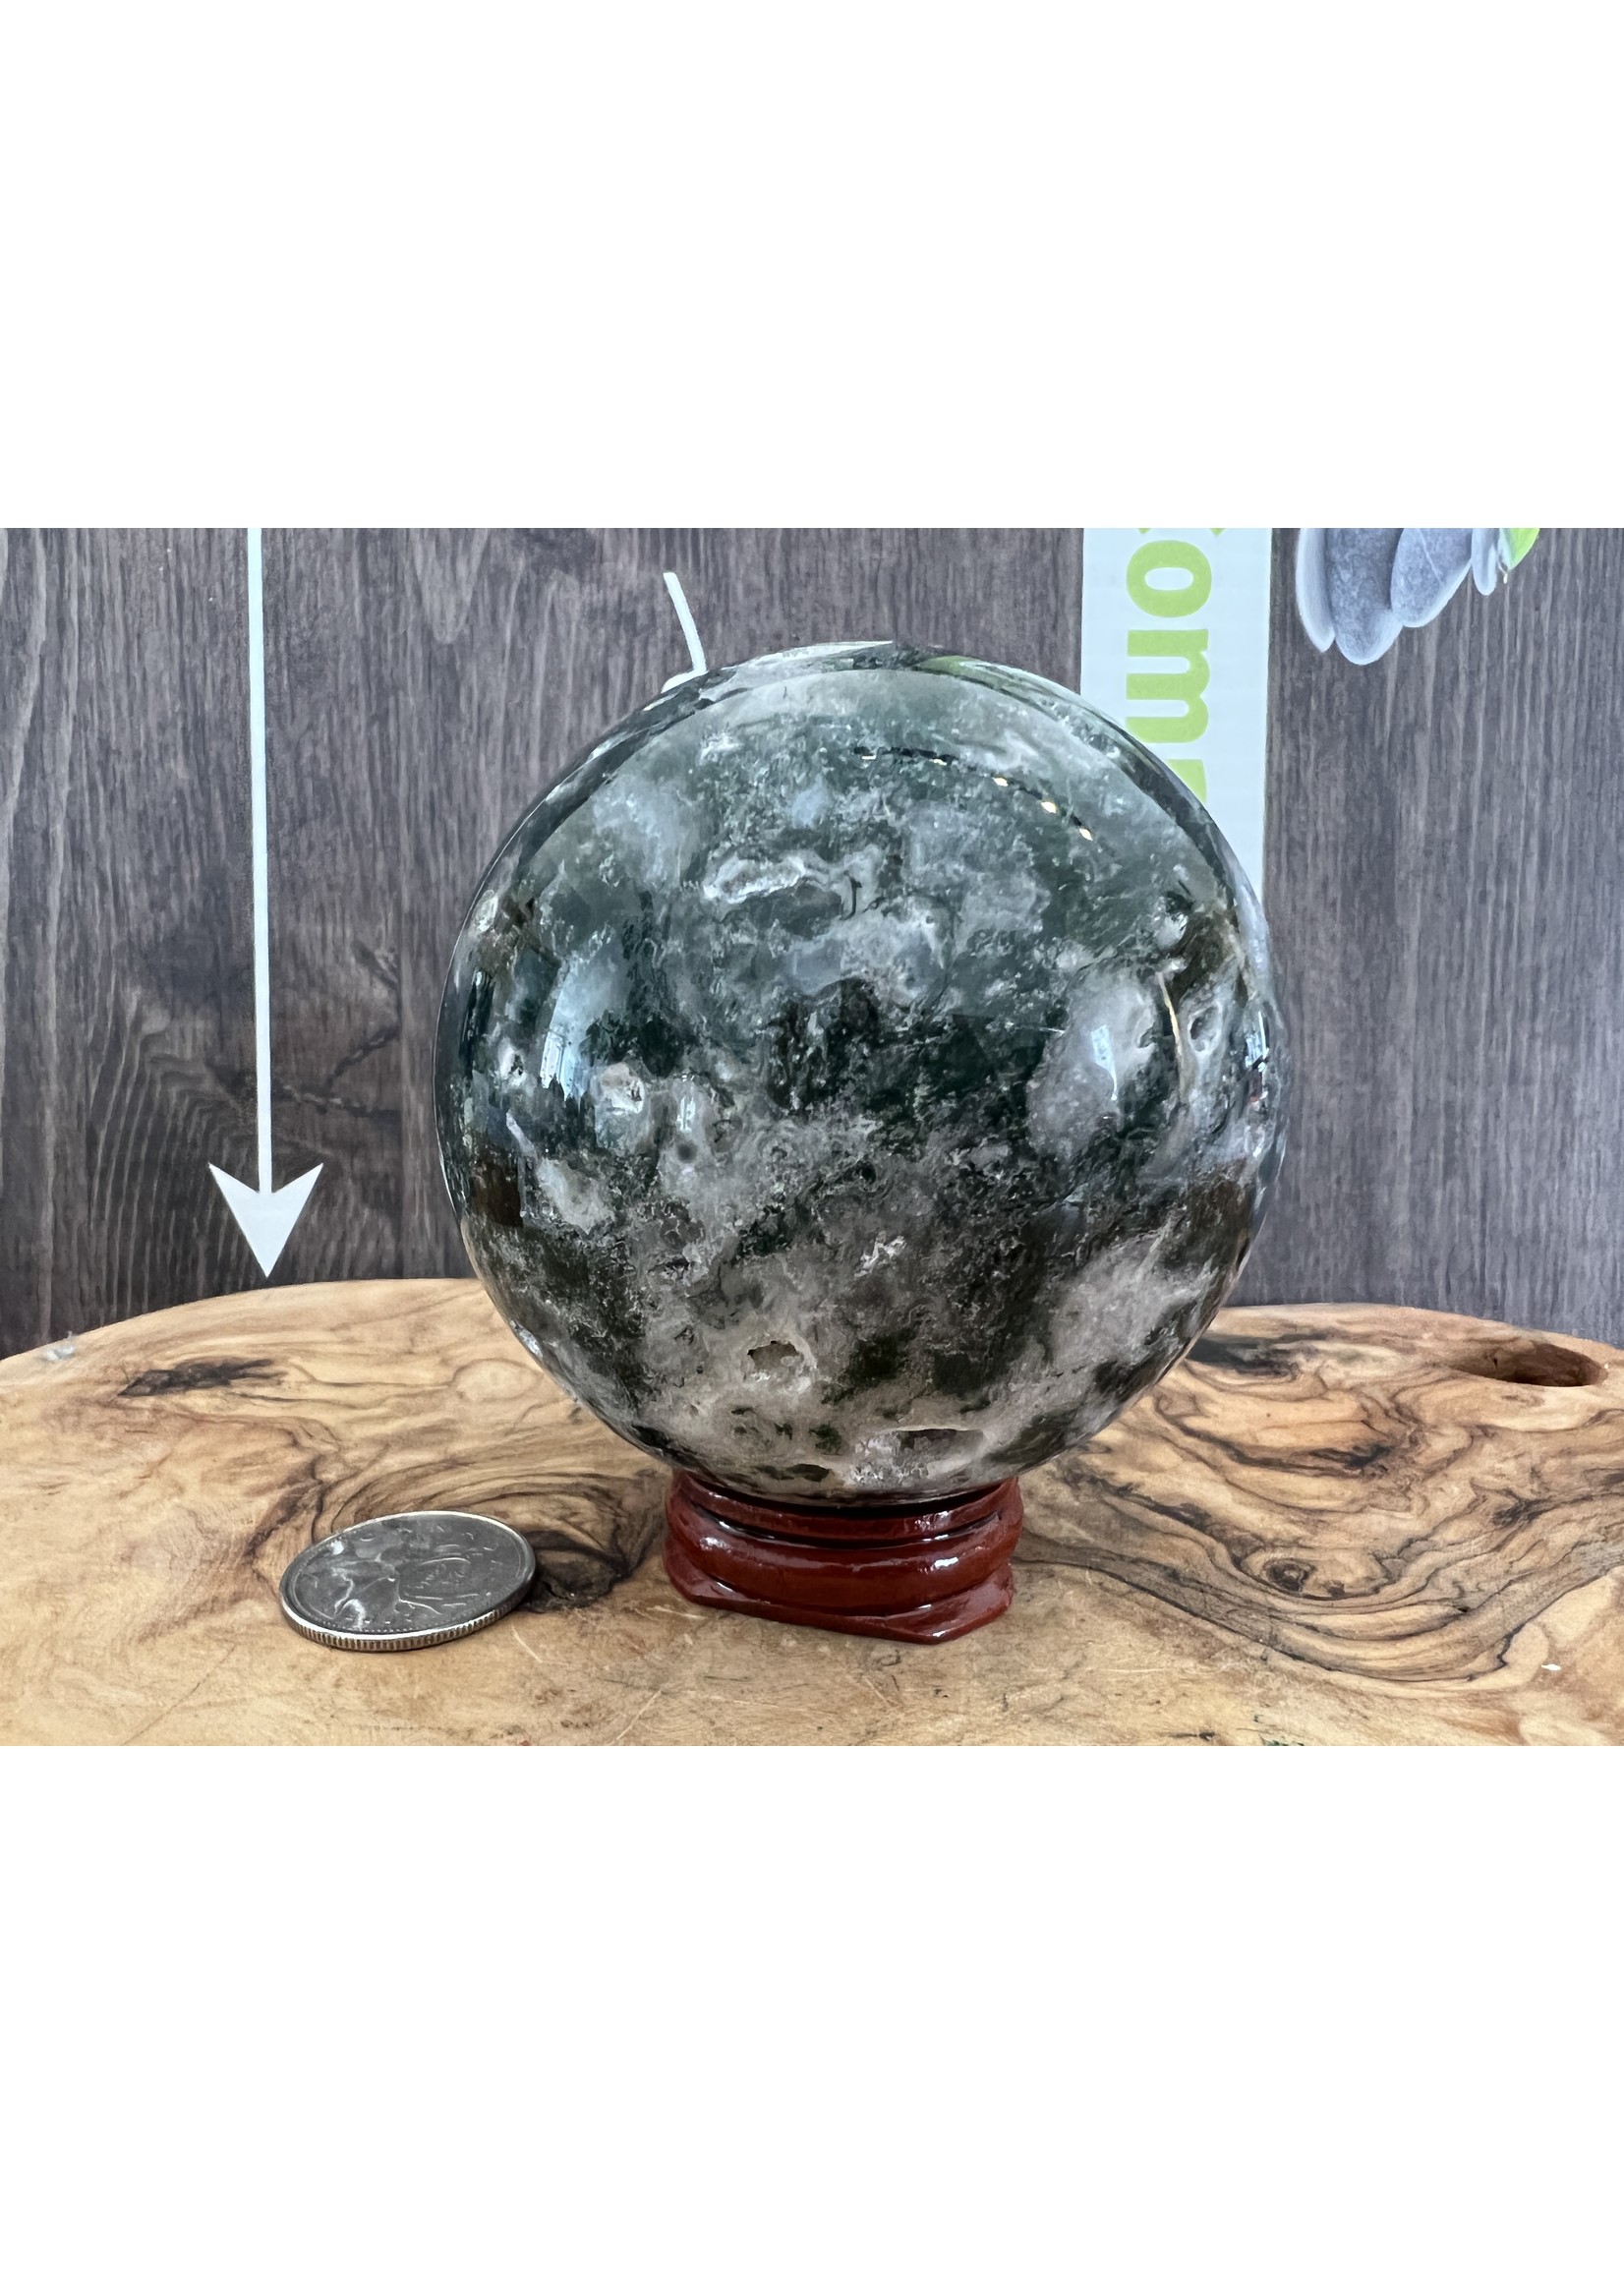 Moss Agate Sphere- Large and Magnificent, for Balance, Peace, and Joyful Living